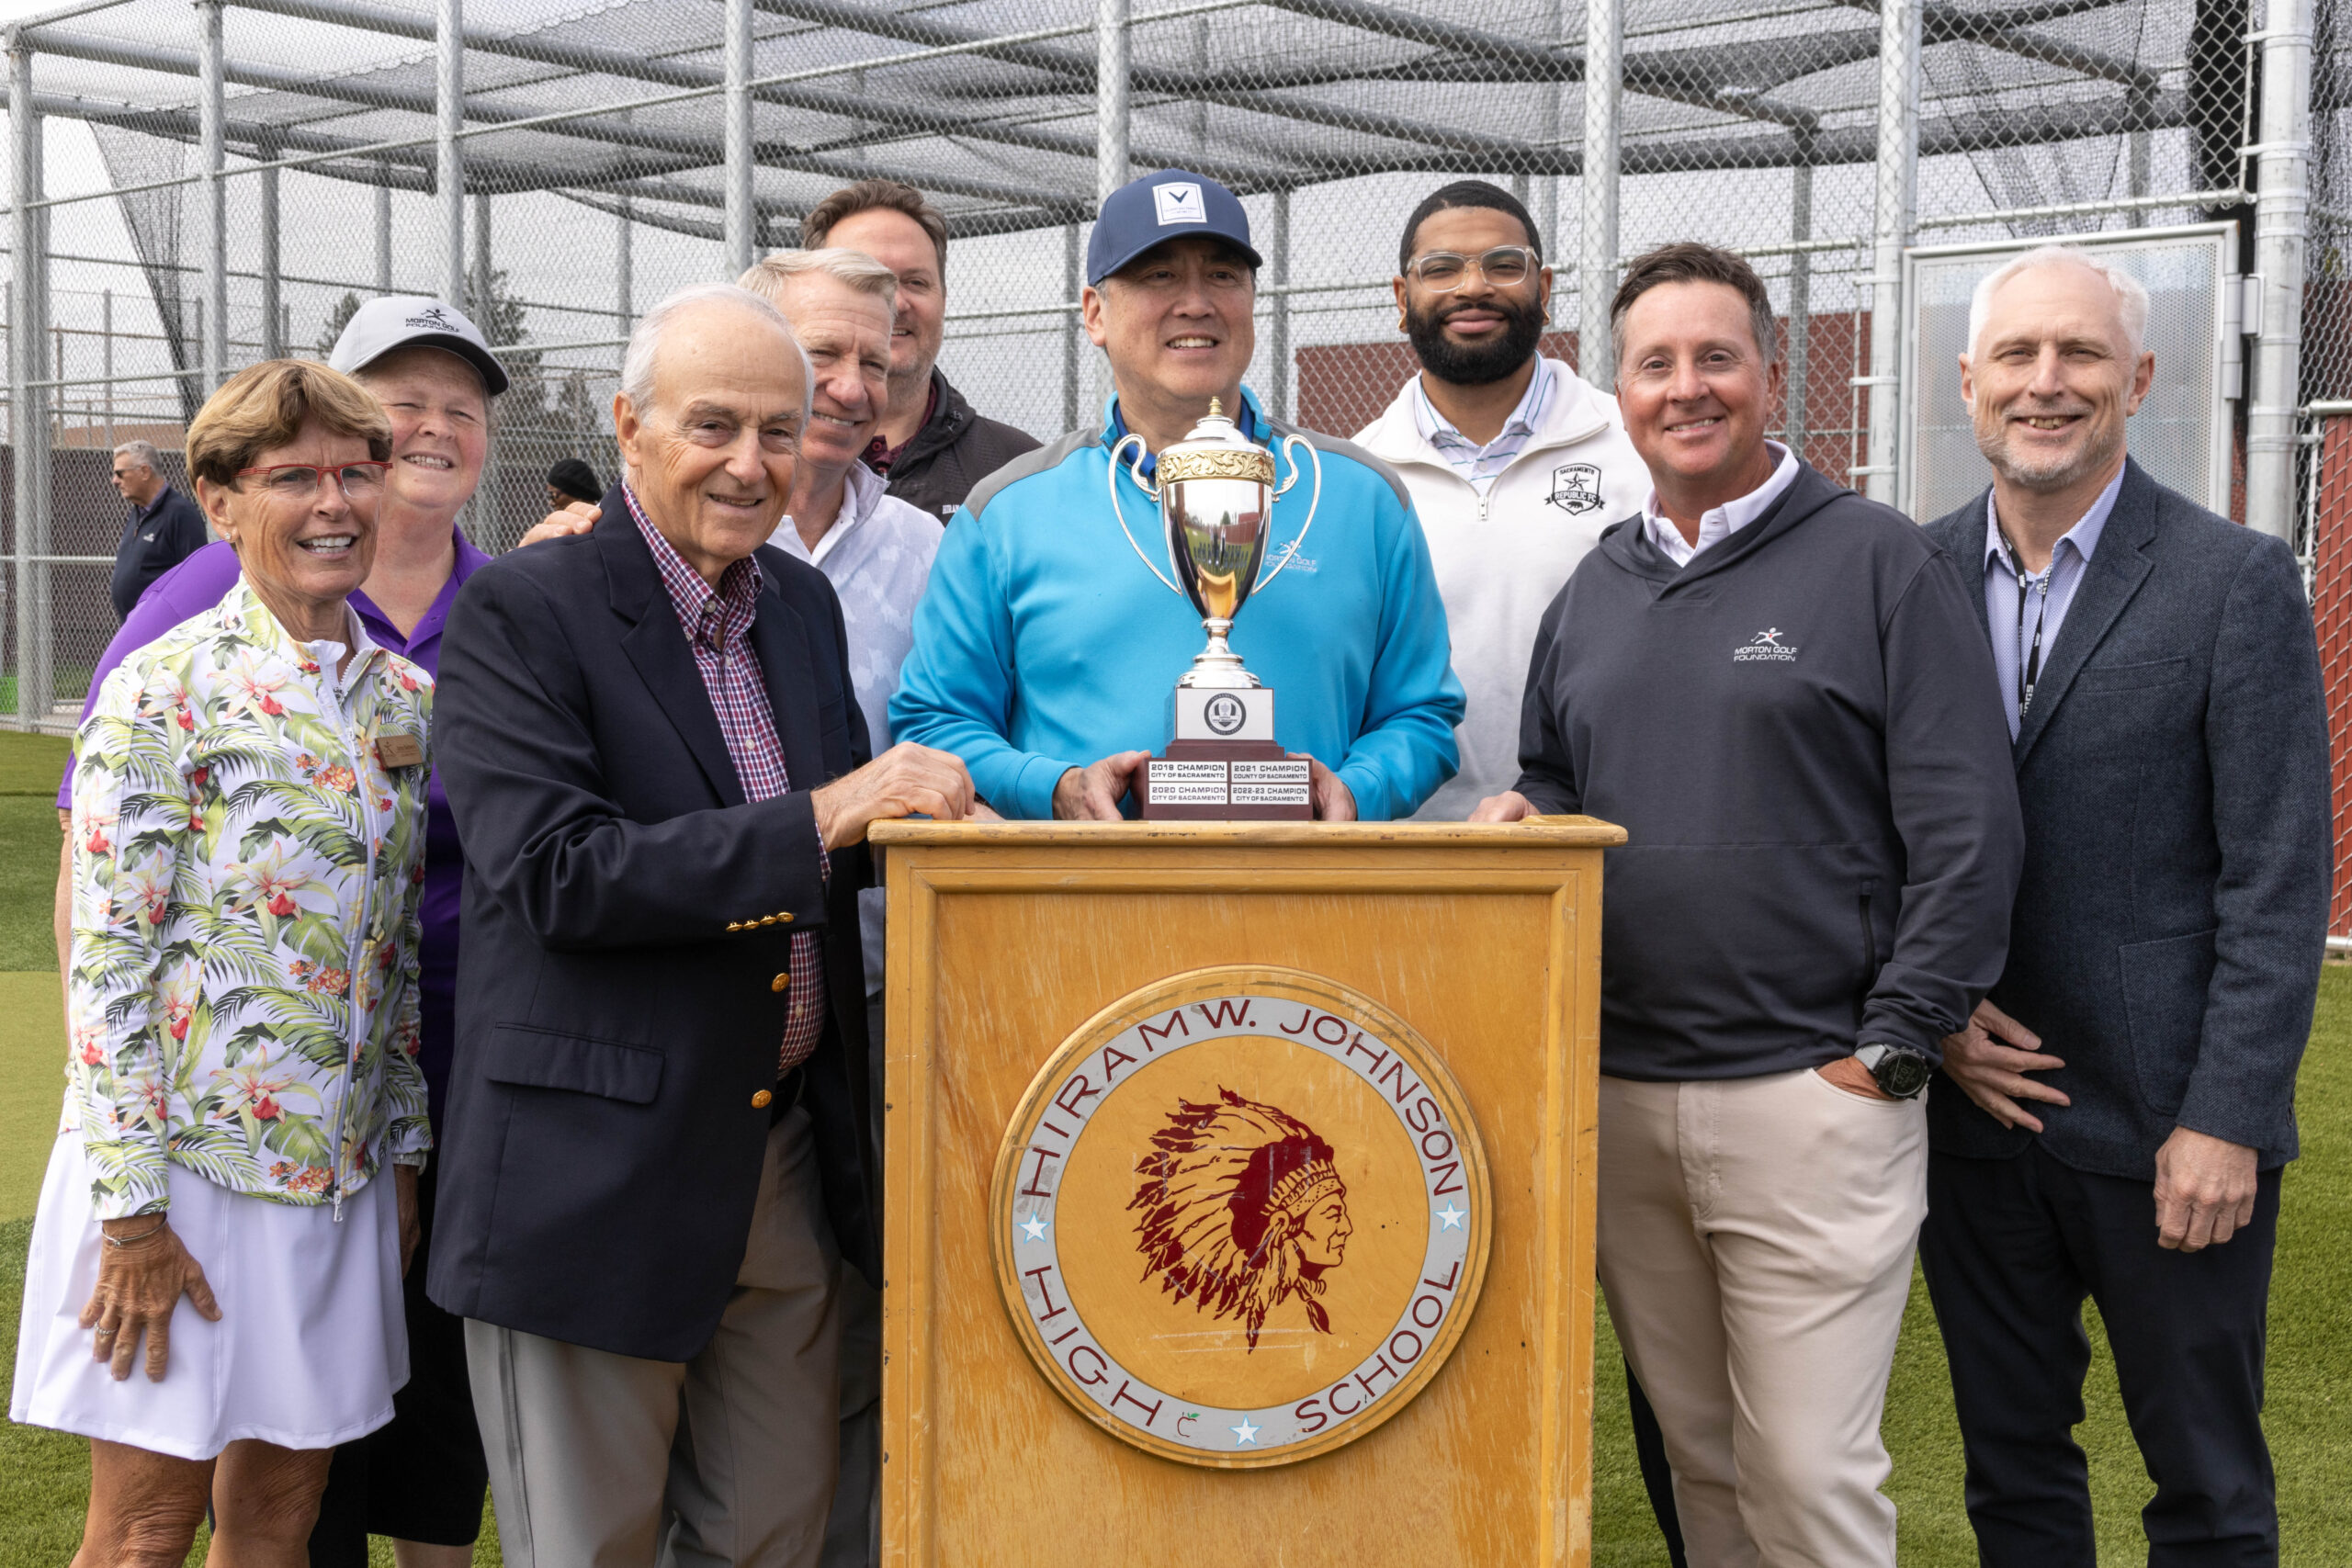 A group photo of the city council members and the Morton Golf Foundation members at the ribbon cutting. They are standing in front of a podium with Hiram Johnson's logo on it.